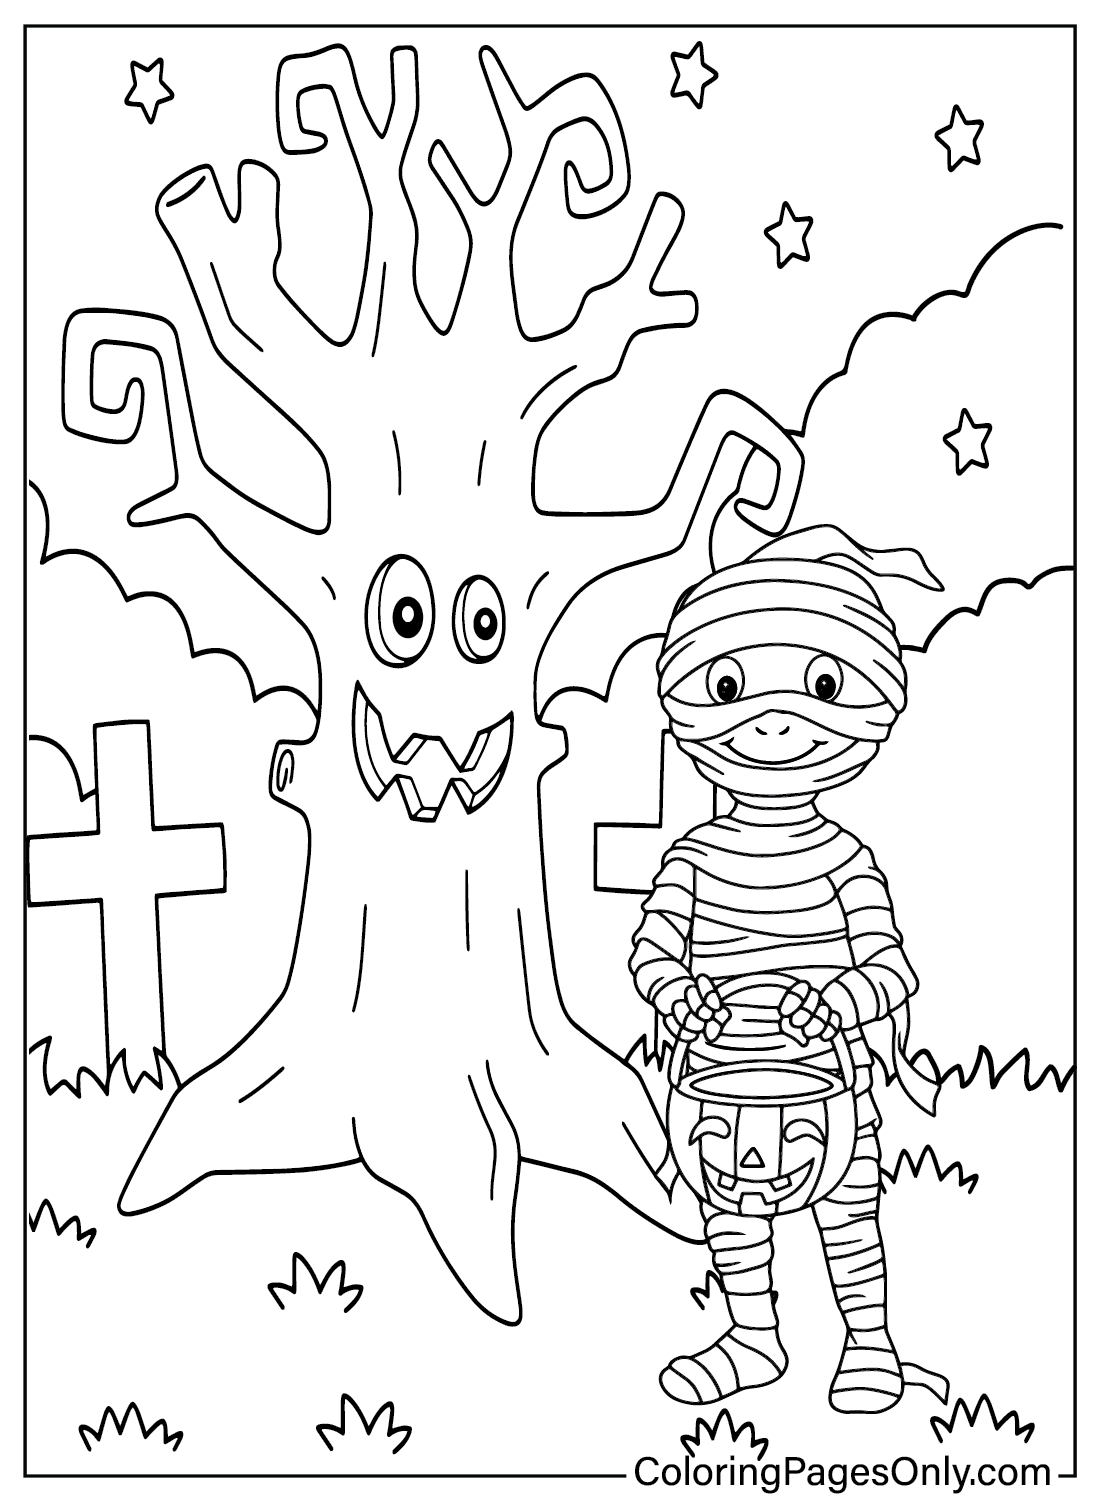 Mummy Coloring Page Printable